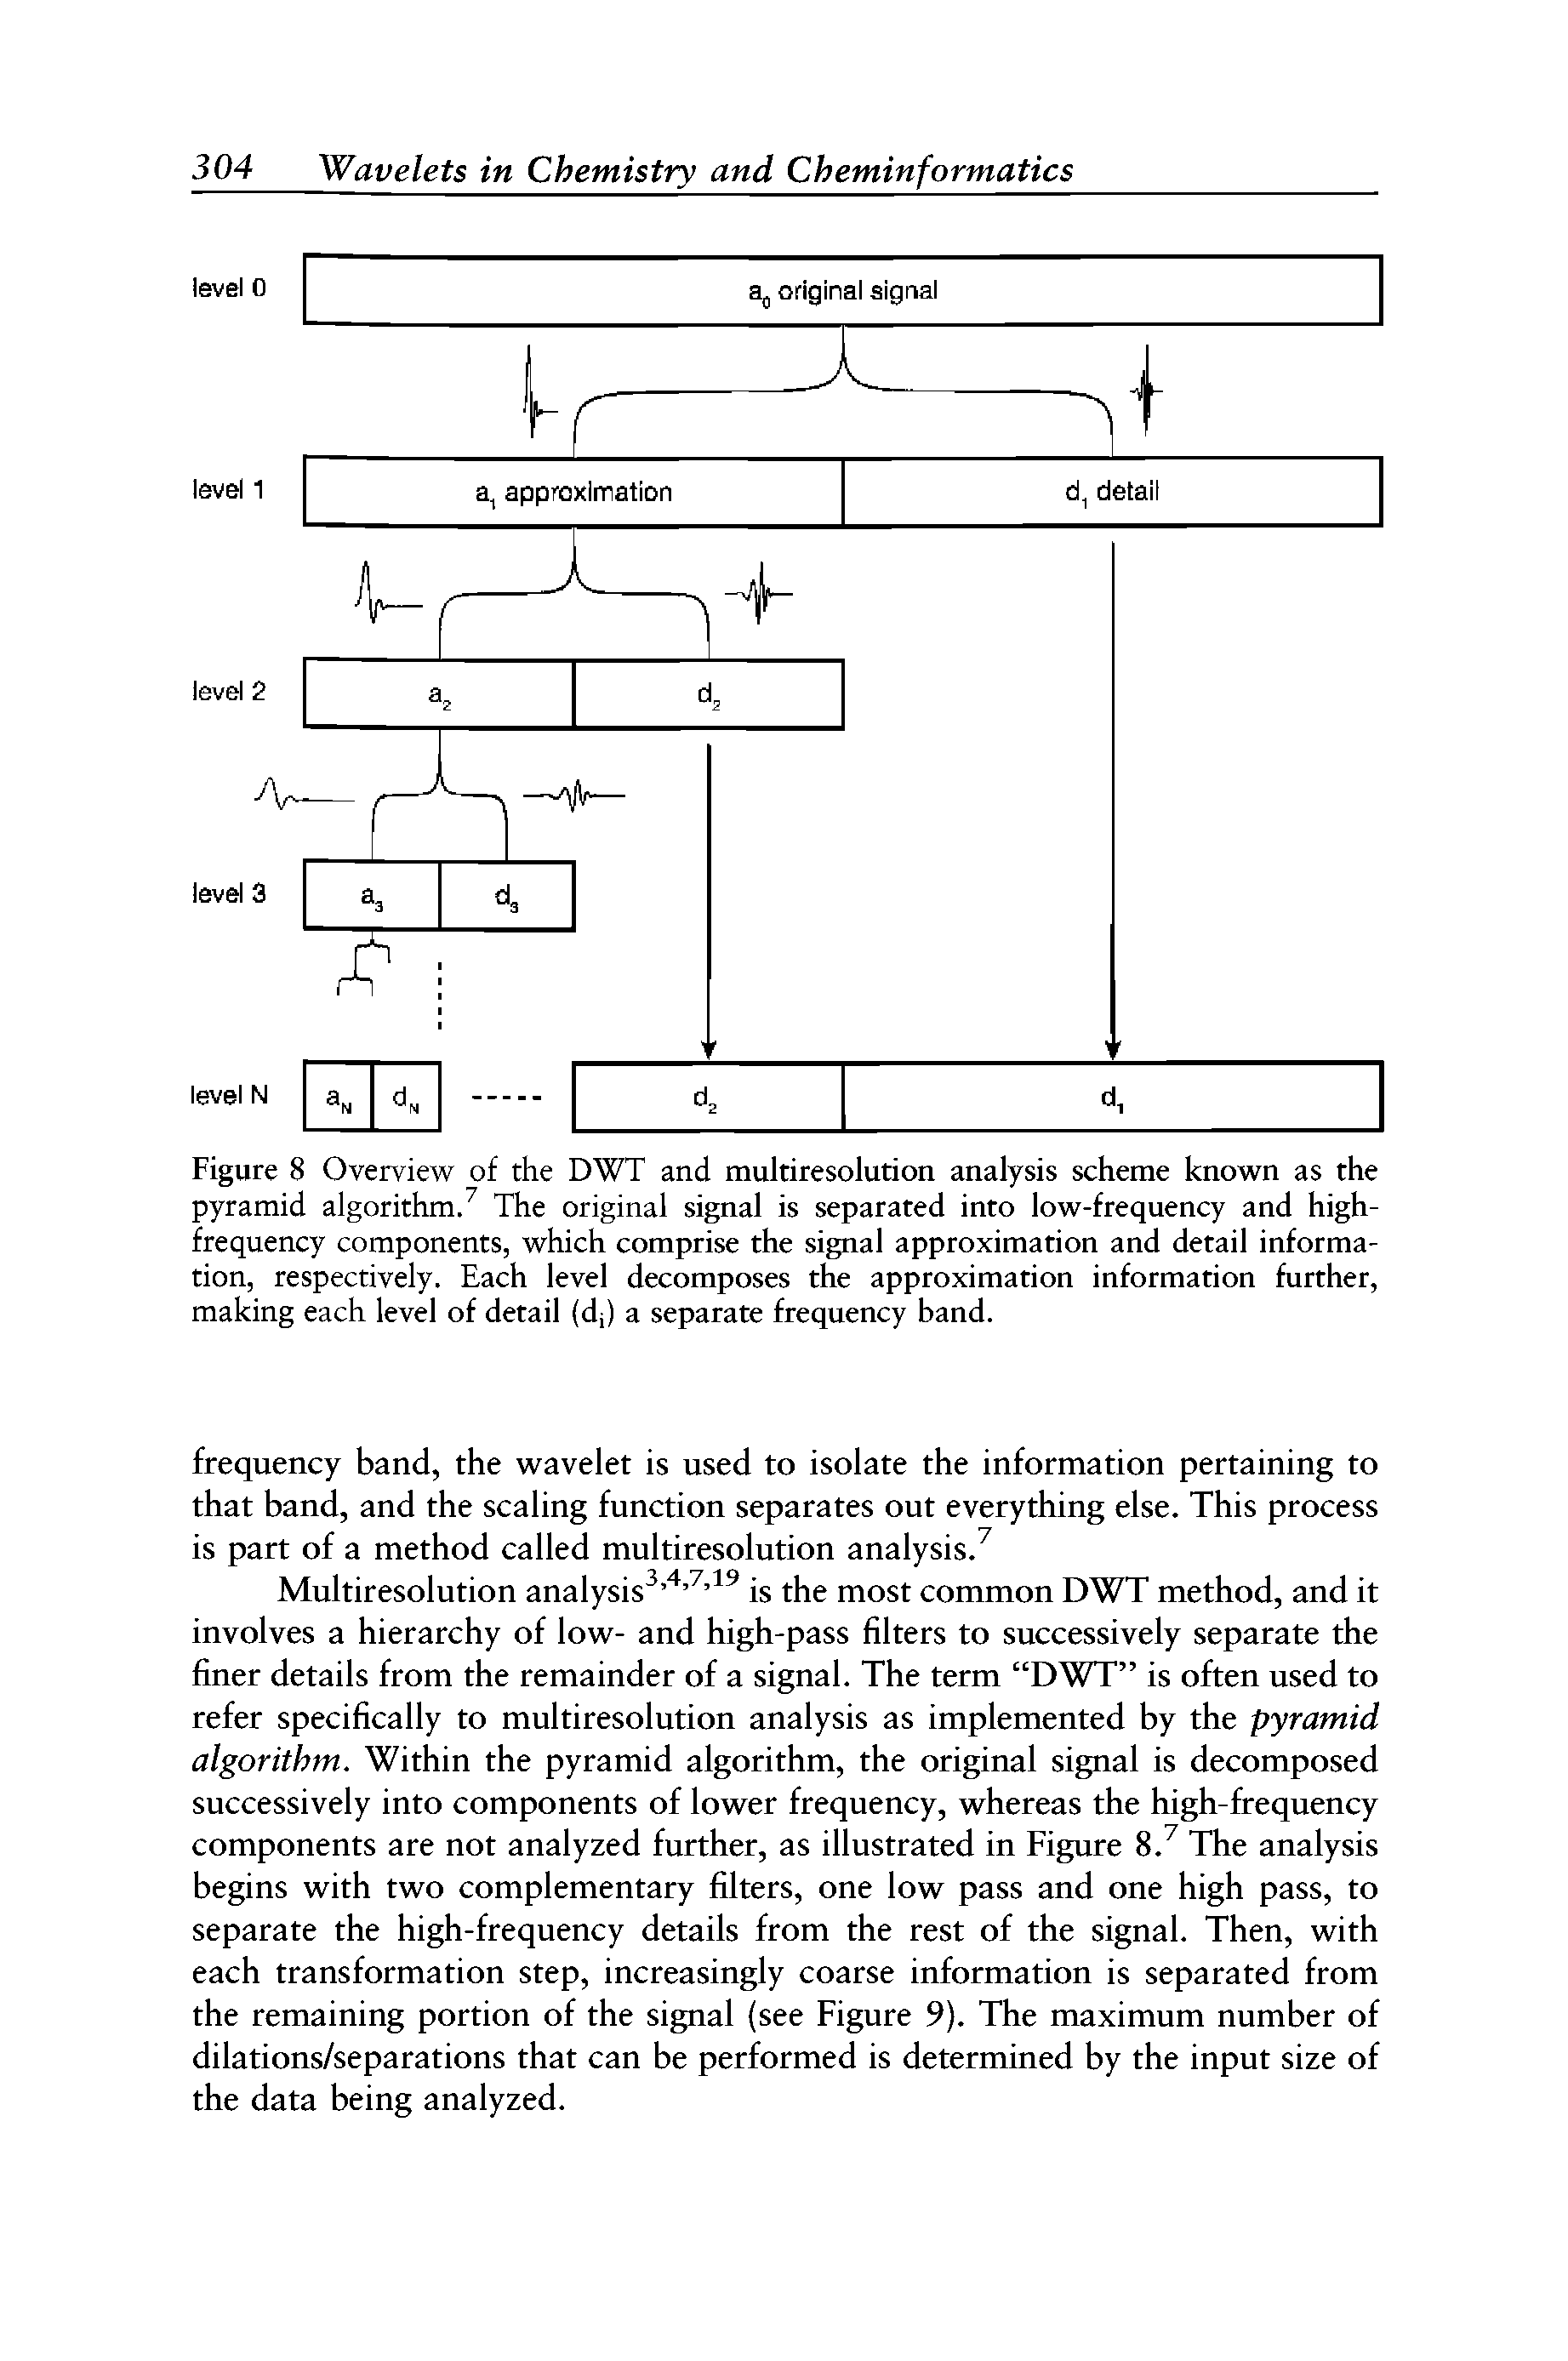 Figure 8 Overview of the DWT and multiresolution analysis scheme known as the pyramid algorithm/ The original signal is separated into low-frequency and high-frequency components, which comprise the signal approximation and detail information, respectively. Each level decomposes the approximation information further, making each level of detail (dj) a separate frequency band.